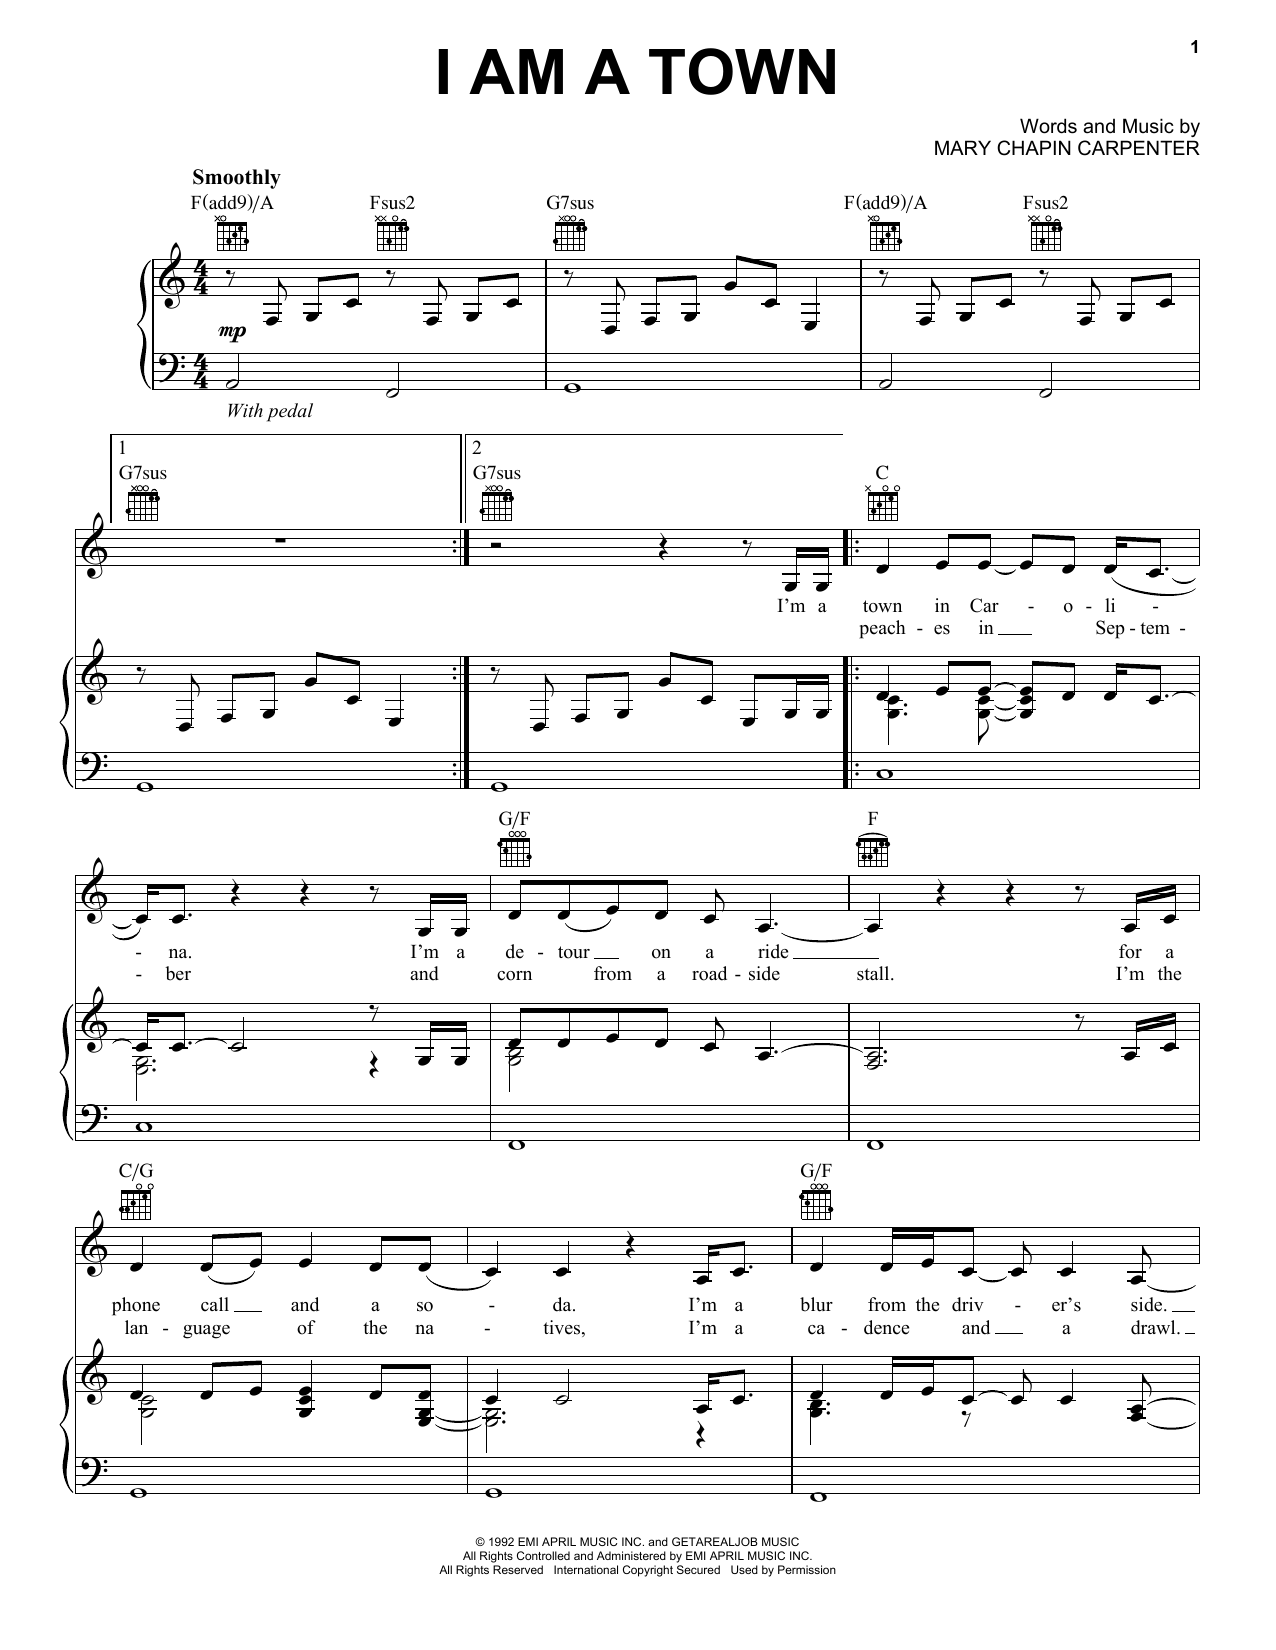 Download Mary Chapin Carpenter I Am A Town Sheet Music